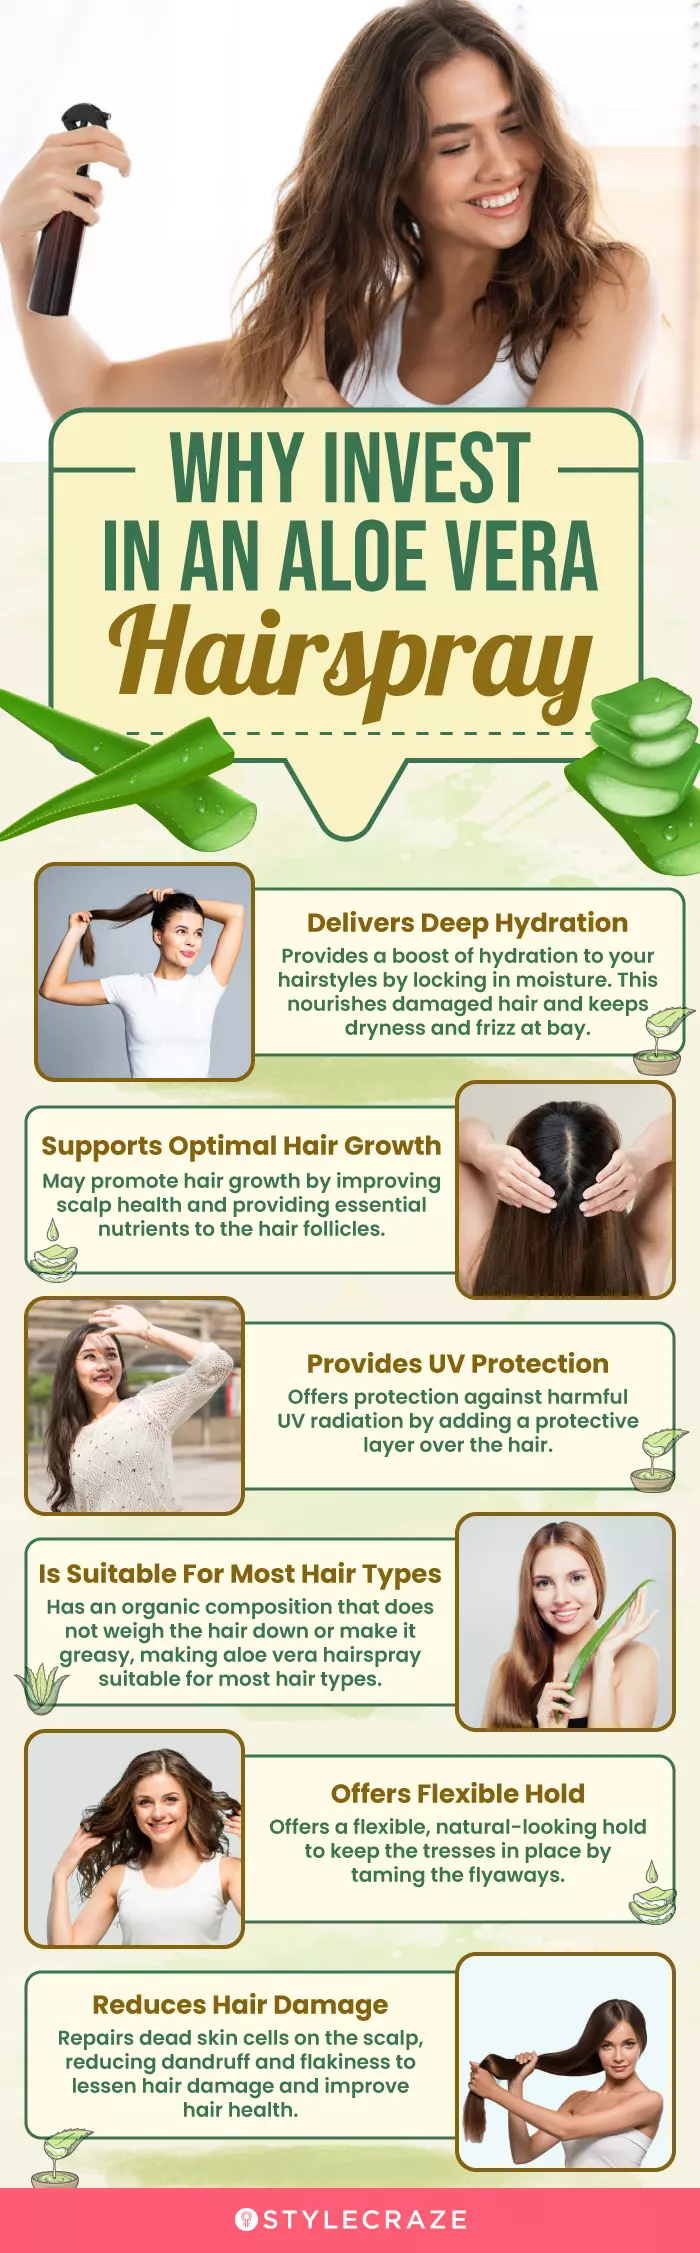 Why Invest In An Aloe Vera Hairspray (infographic)